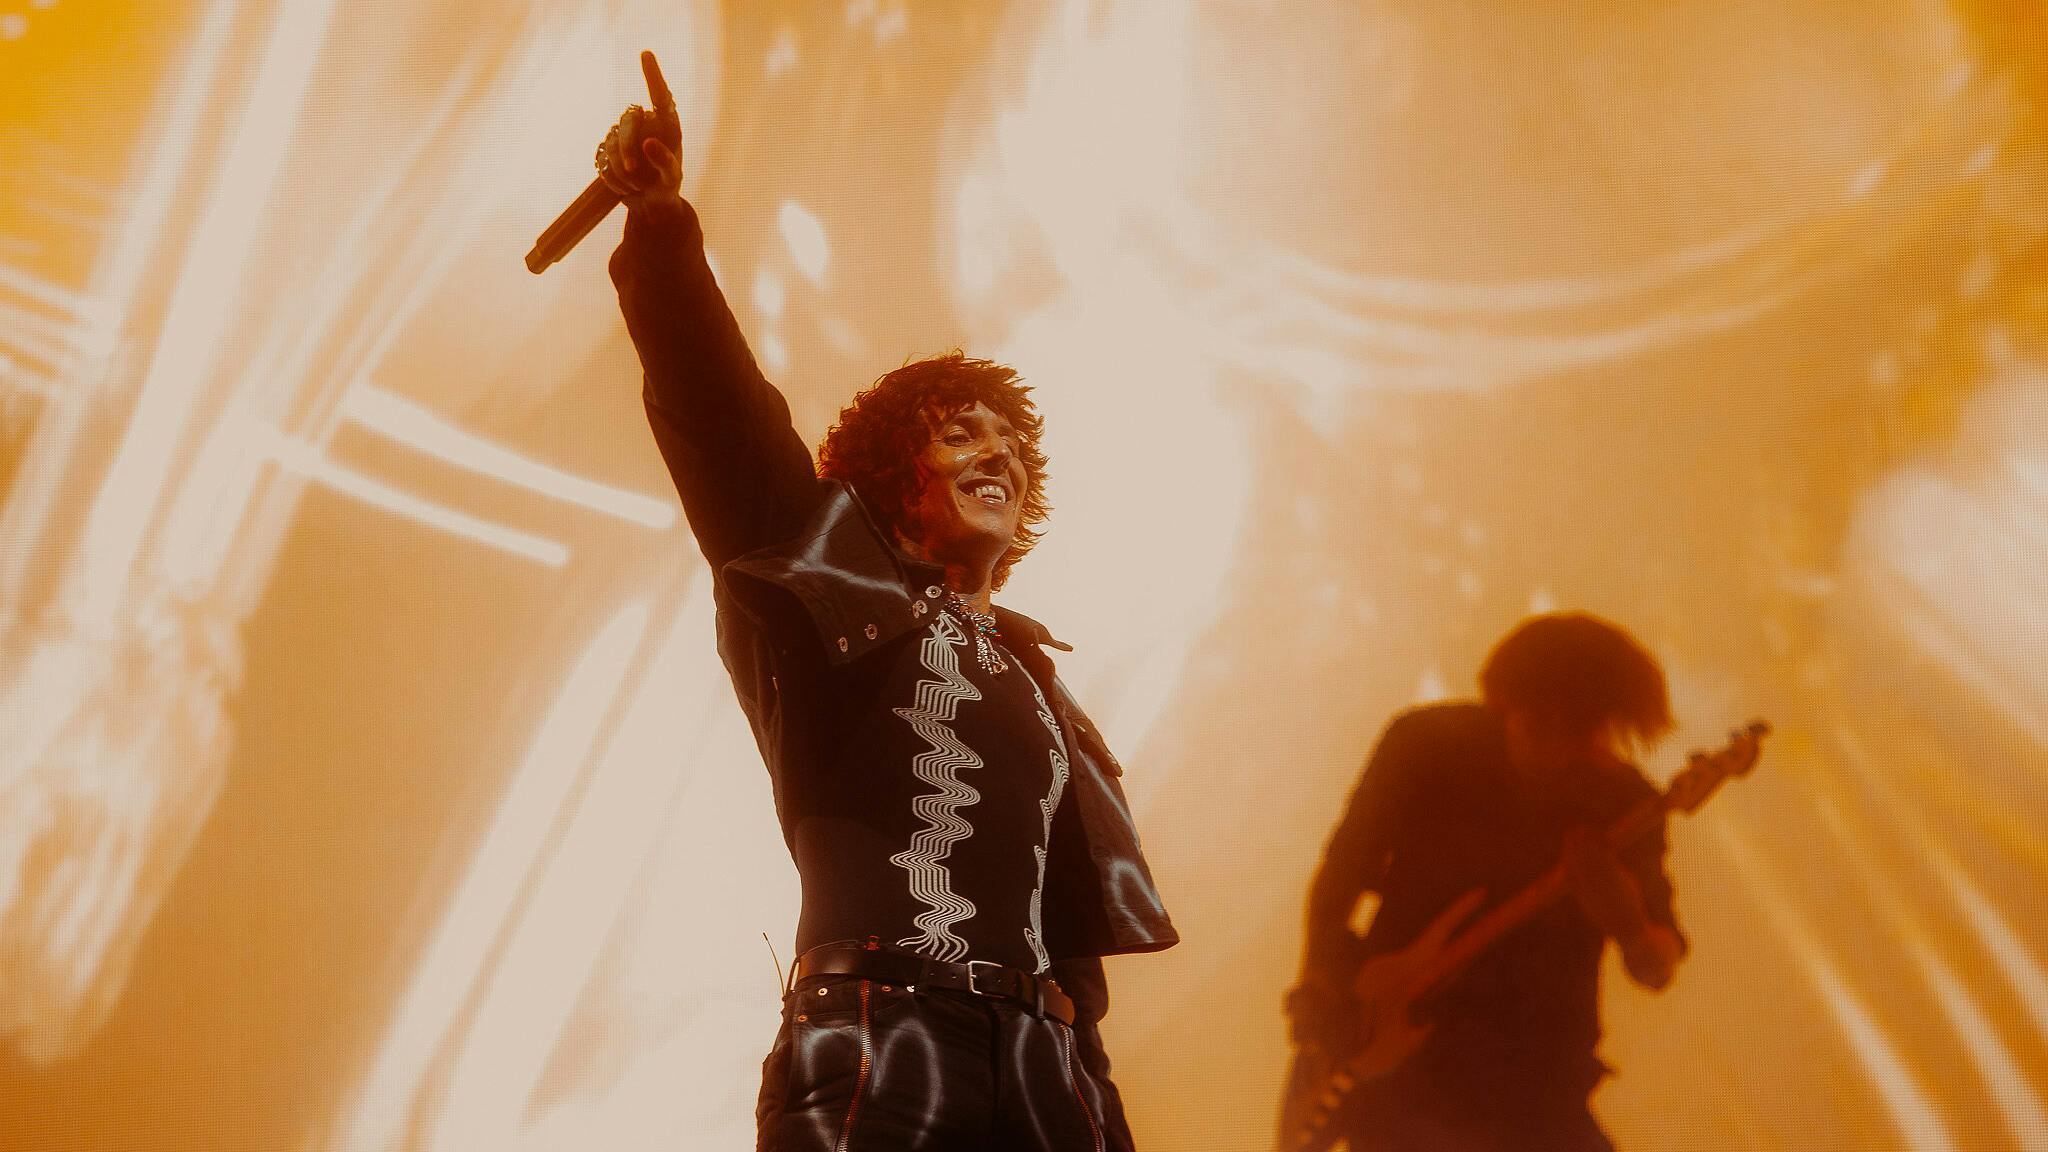 What happened when Bring Me The Horizon headlined Reading Festival